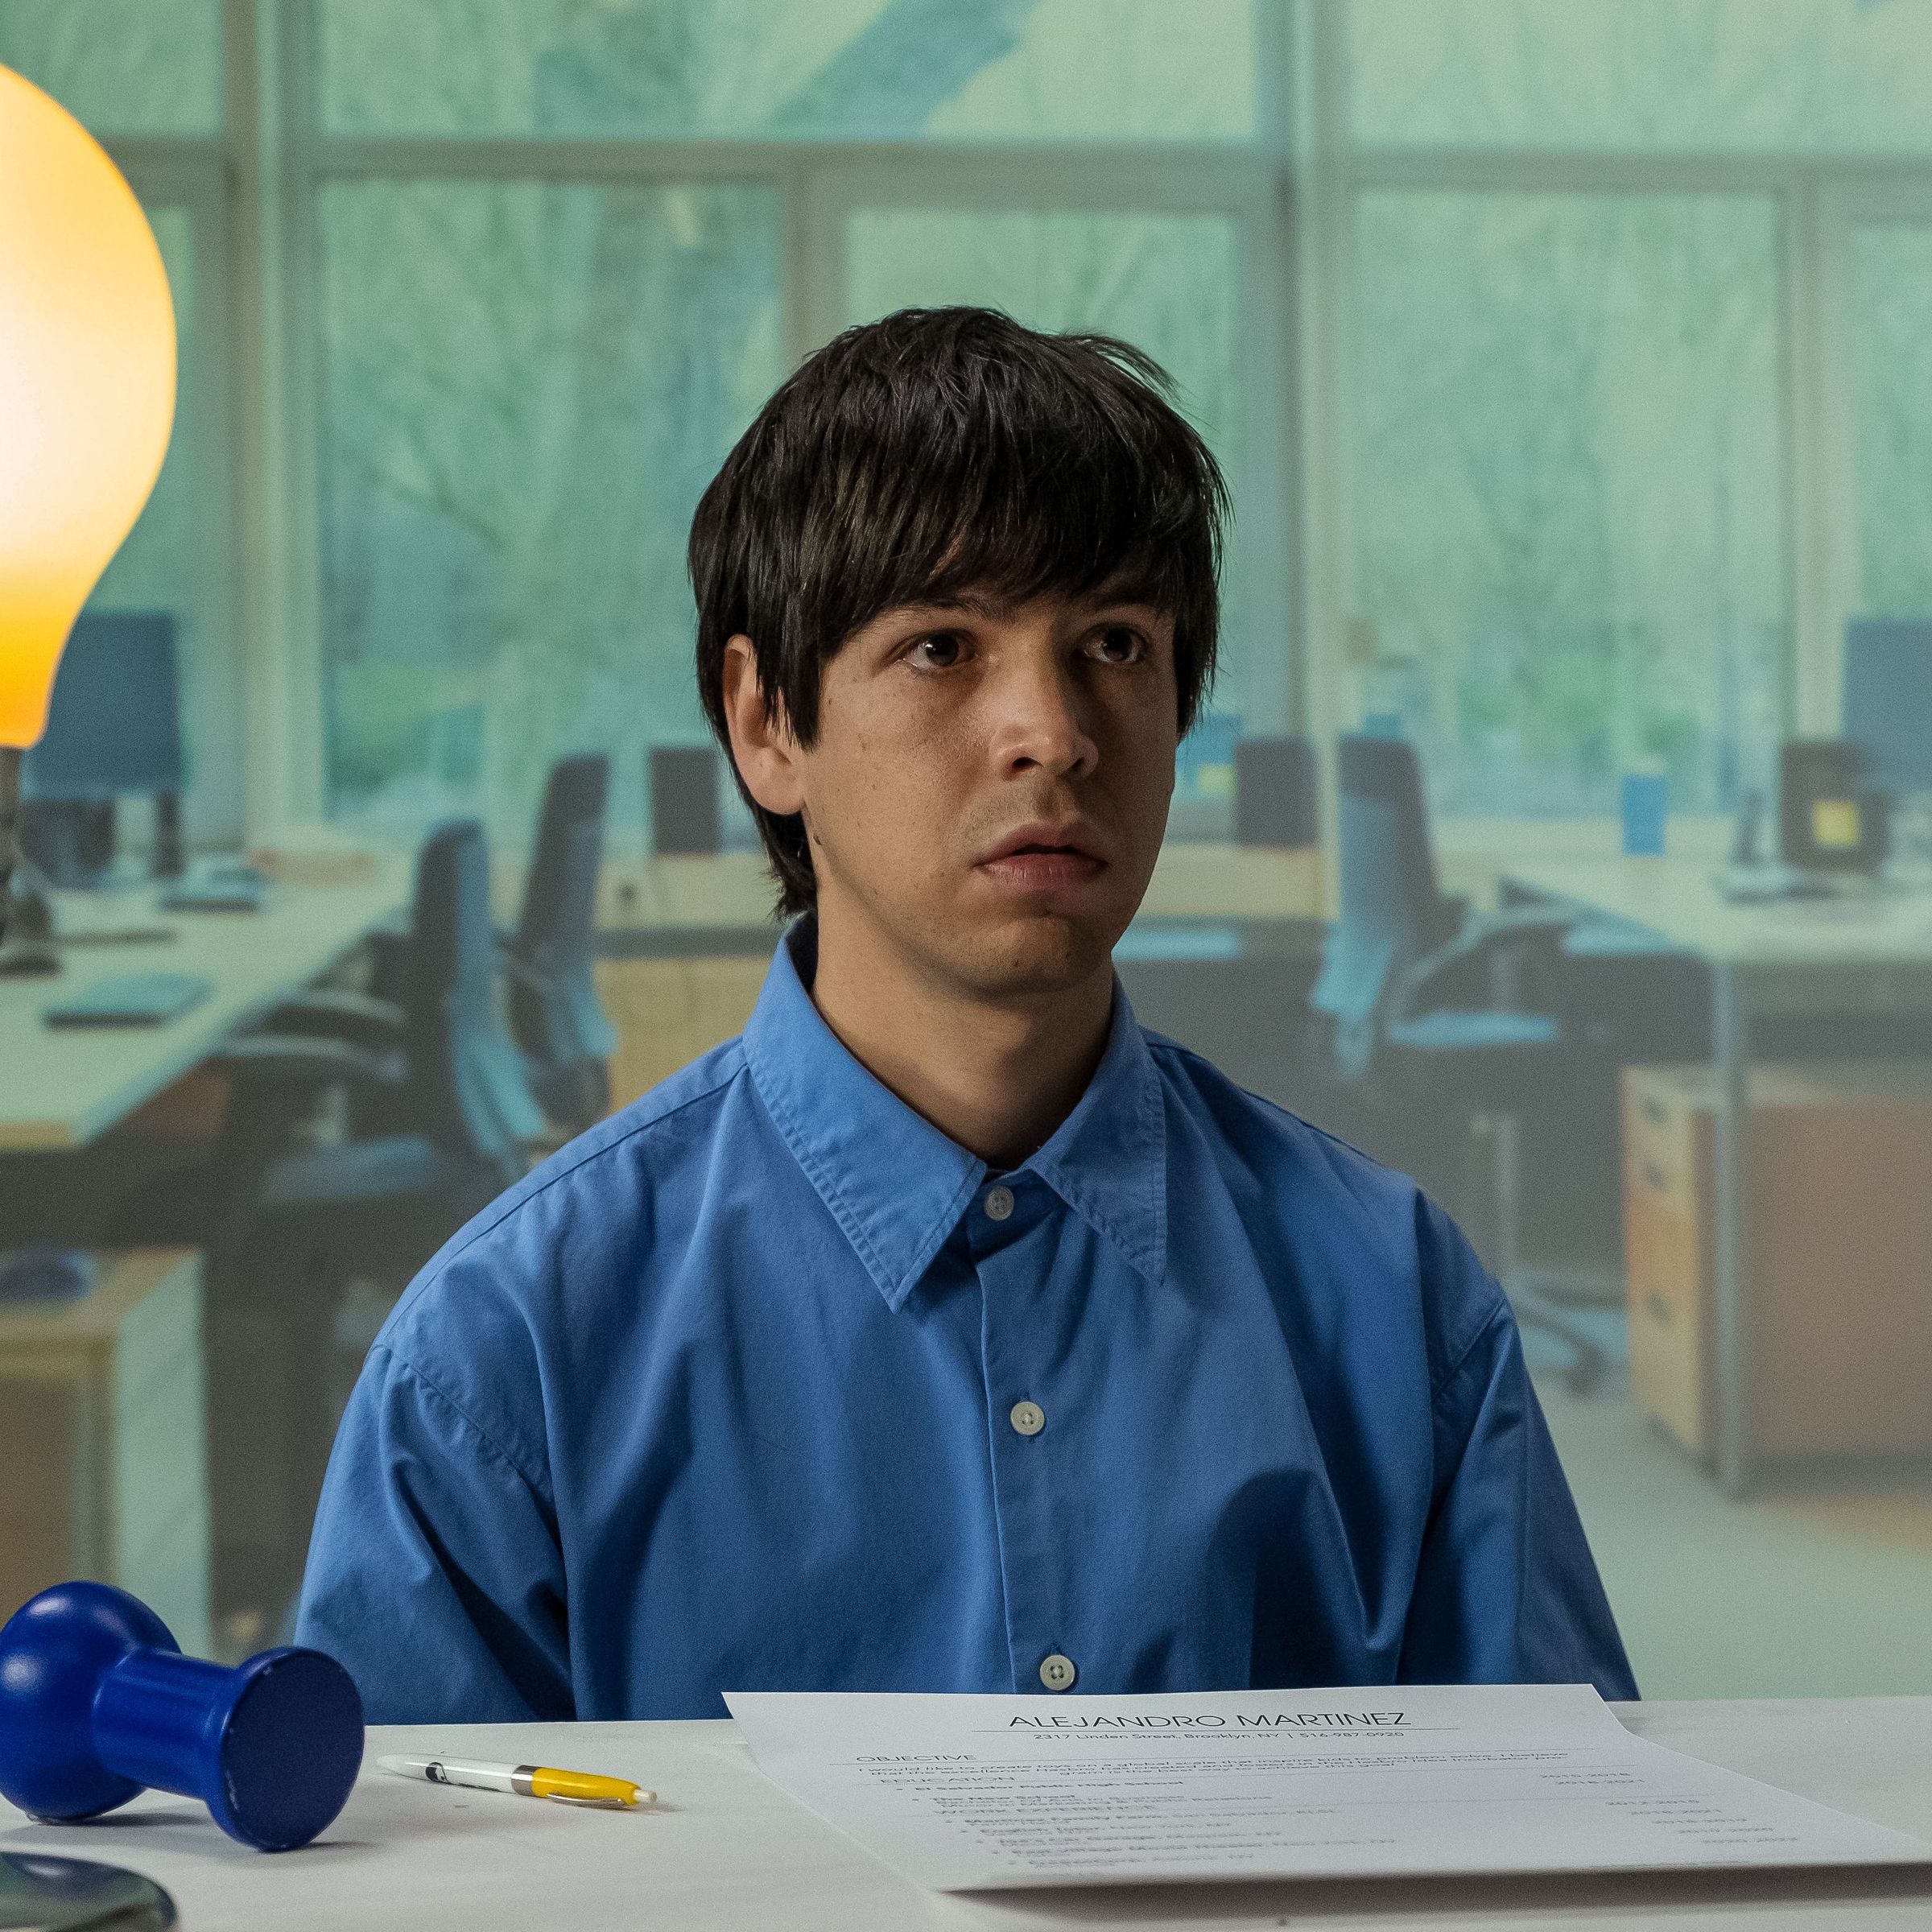 A man in a blue button-down shirt sitting at a desk with a lamp shaped like an oversized light bulb. The man is sitting at a desk on which sits an oversized thumbtack, a pen, and a piece of paper.